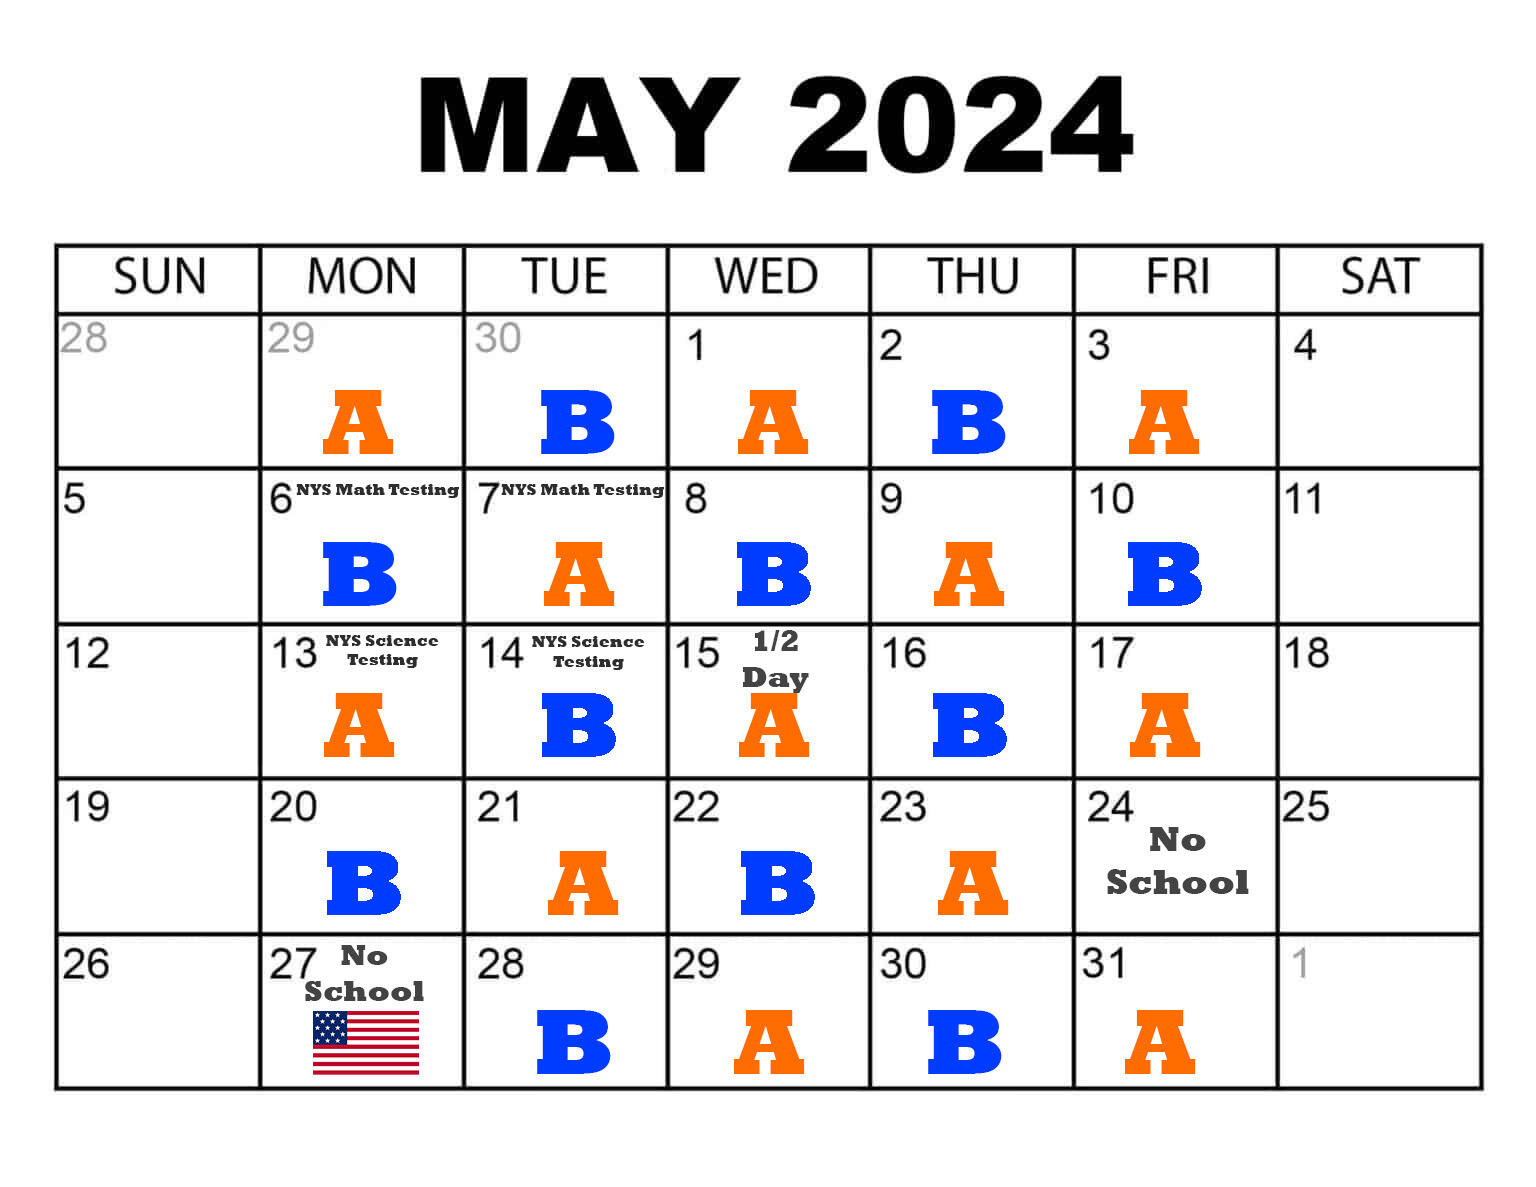 May letter day schedule